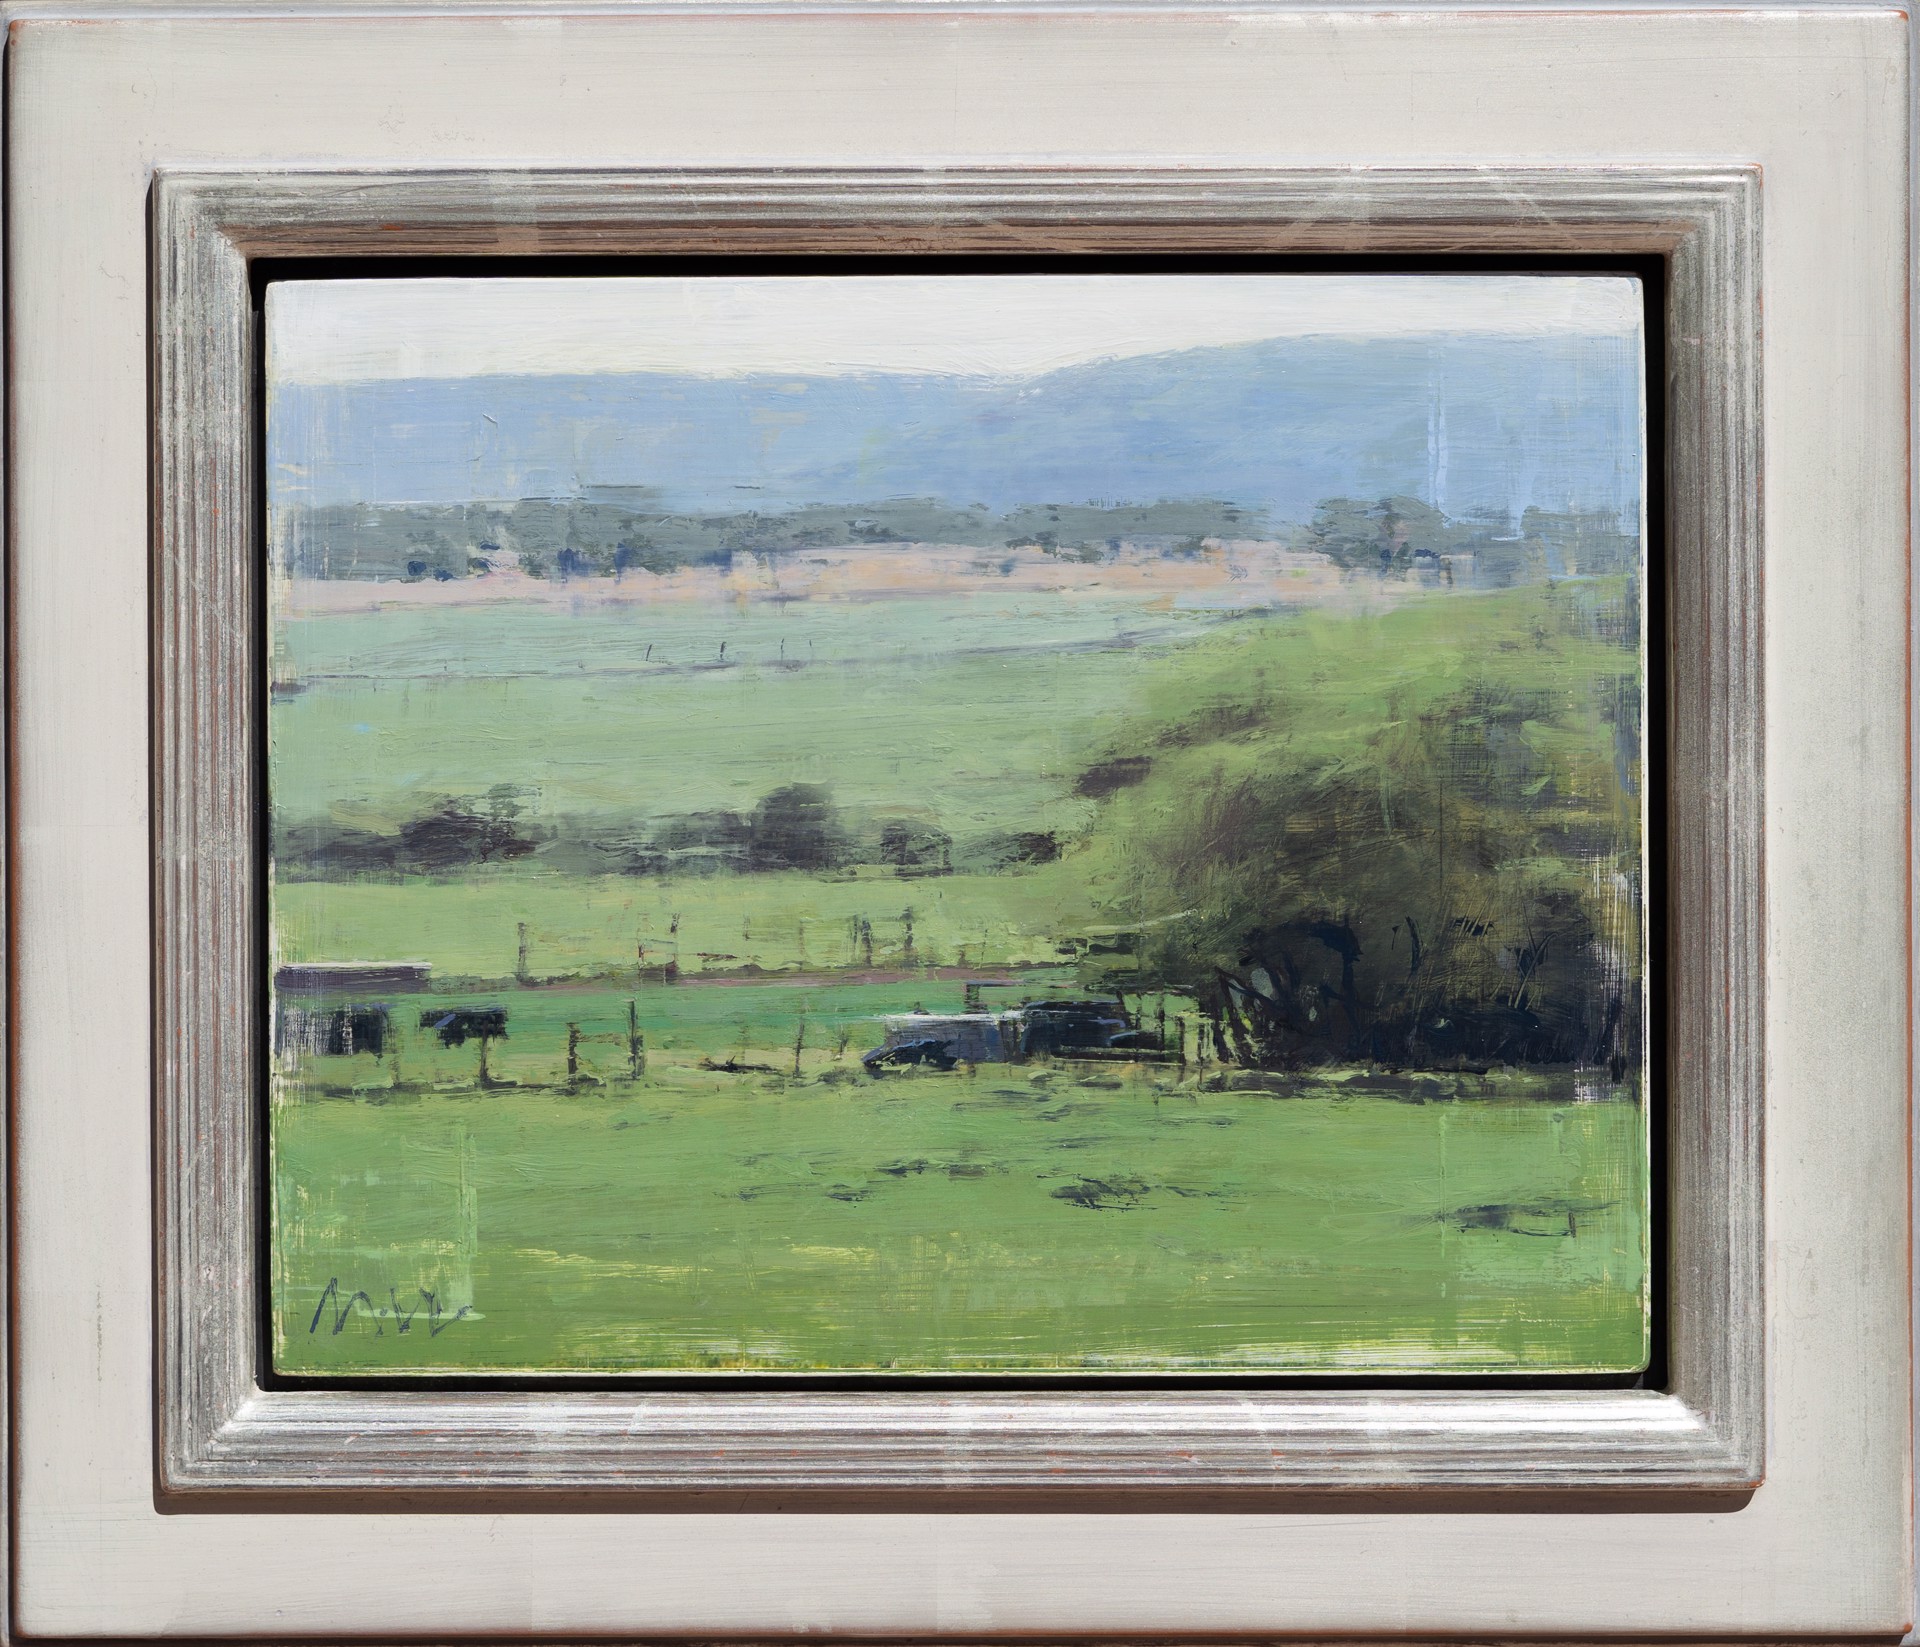 Small Green Landscape with Black Cows by Michael Workman